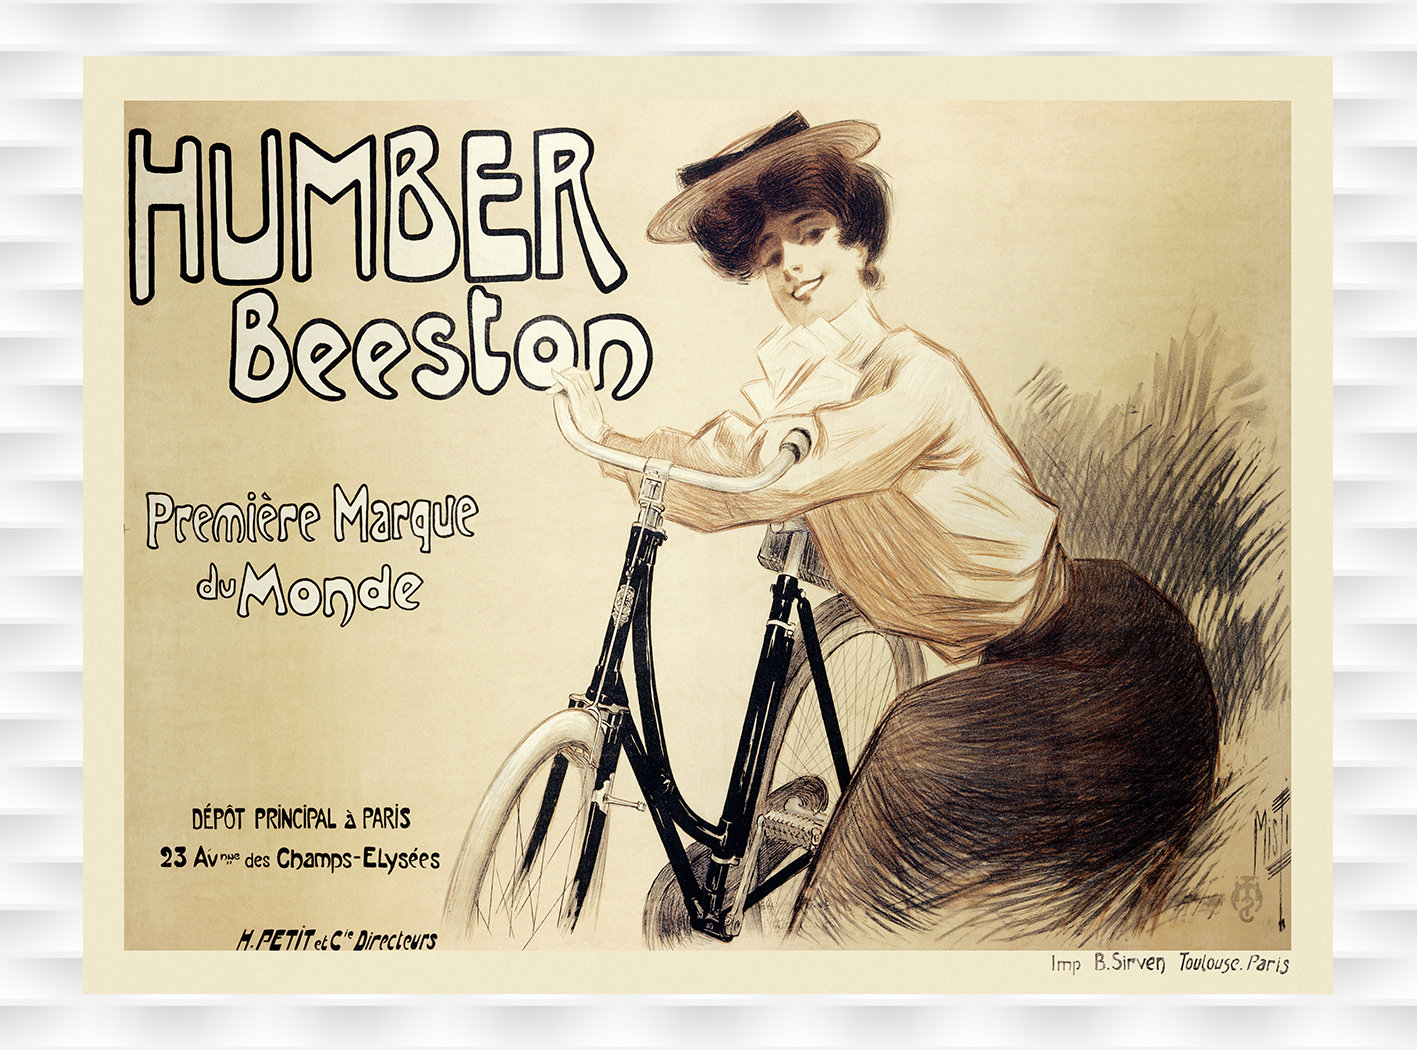 Vintage Cycling advertising poster reproduction. Cycles Humber 